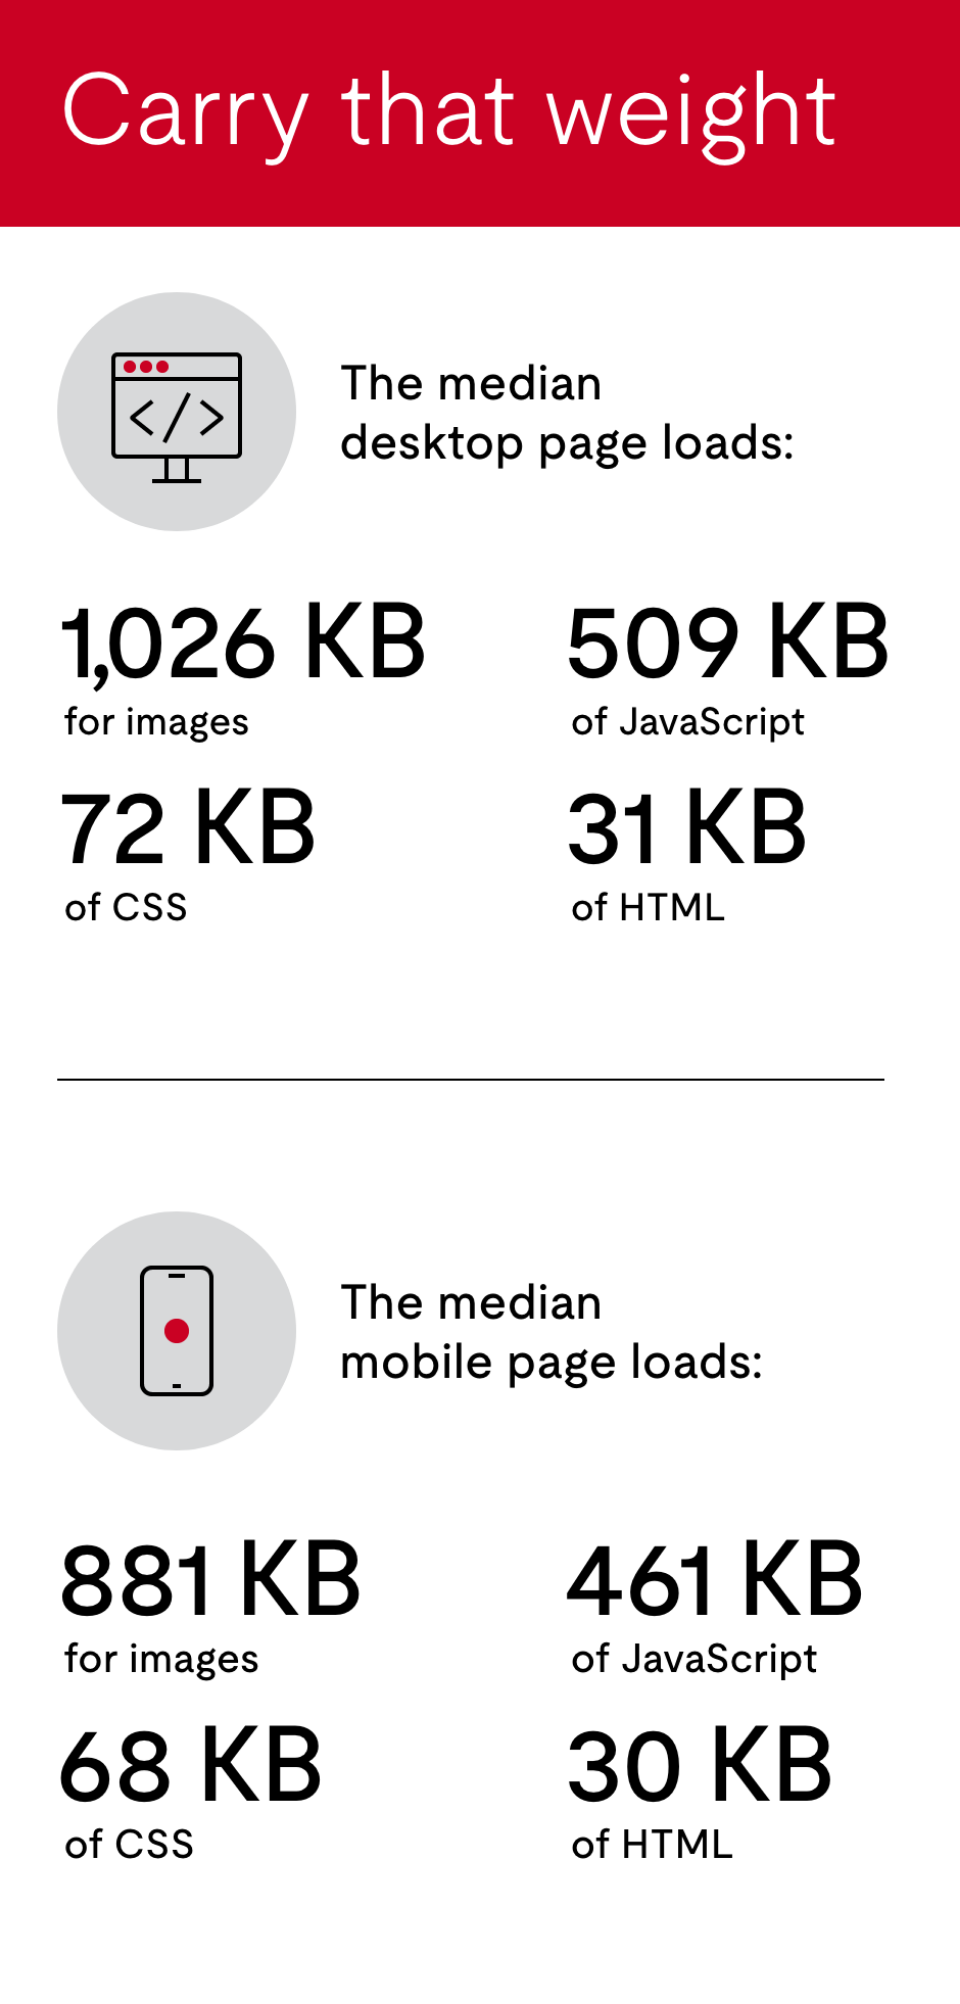 “Carry that weight: The median desktop page loads 1,026 KB of images, 509 KB of JavaScript, 72 KB of CSS and 31 KB of HTML. The median mobile page loads 881 KB of images, 461 KB of JavaScript, 68 KB of CSS and 30 KB of HTML.